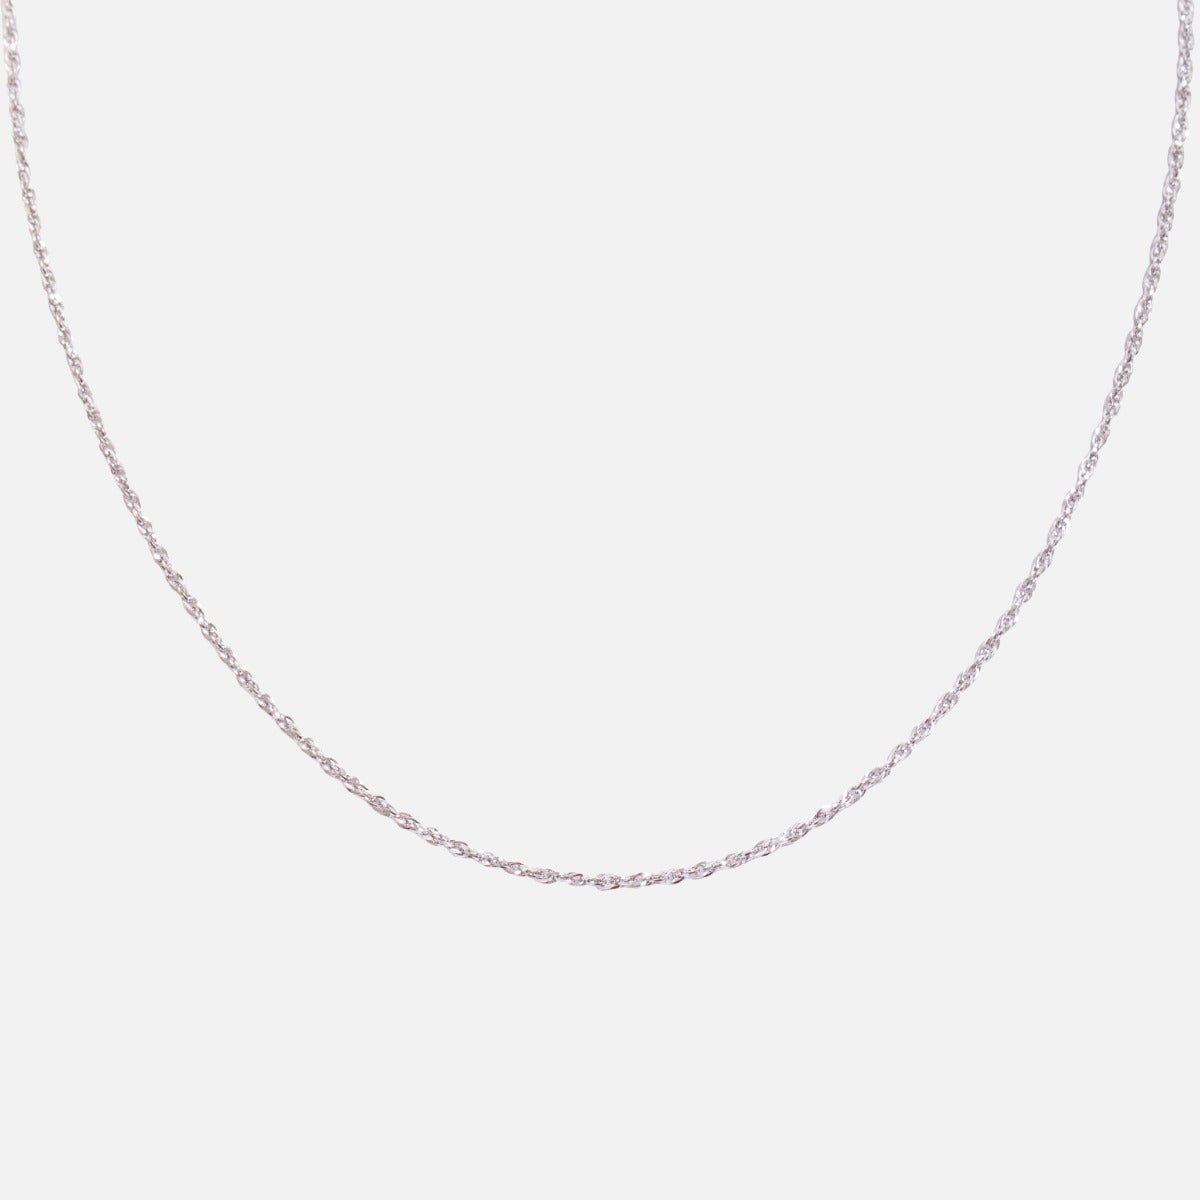 18 inch silvered chain, stainless steel